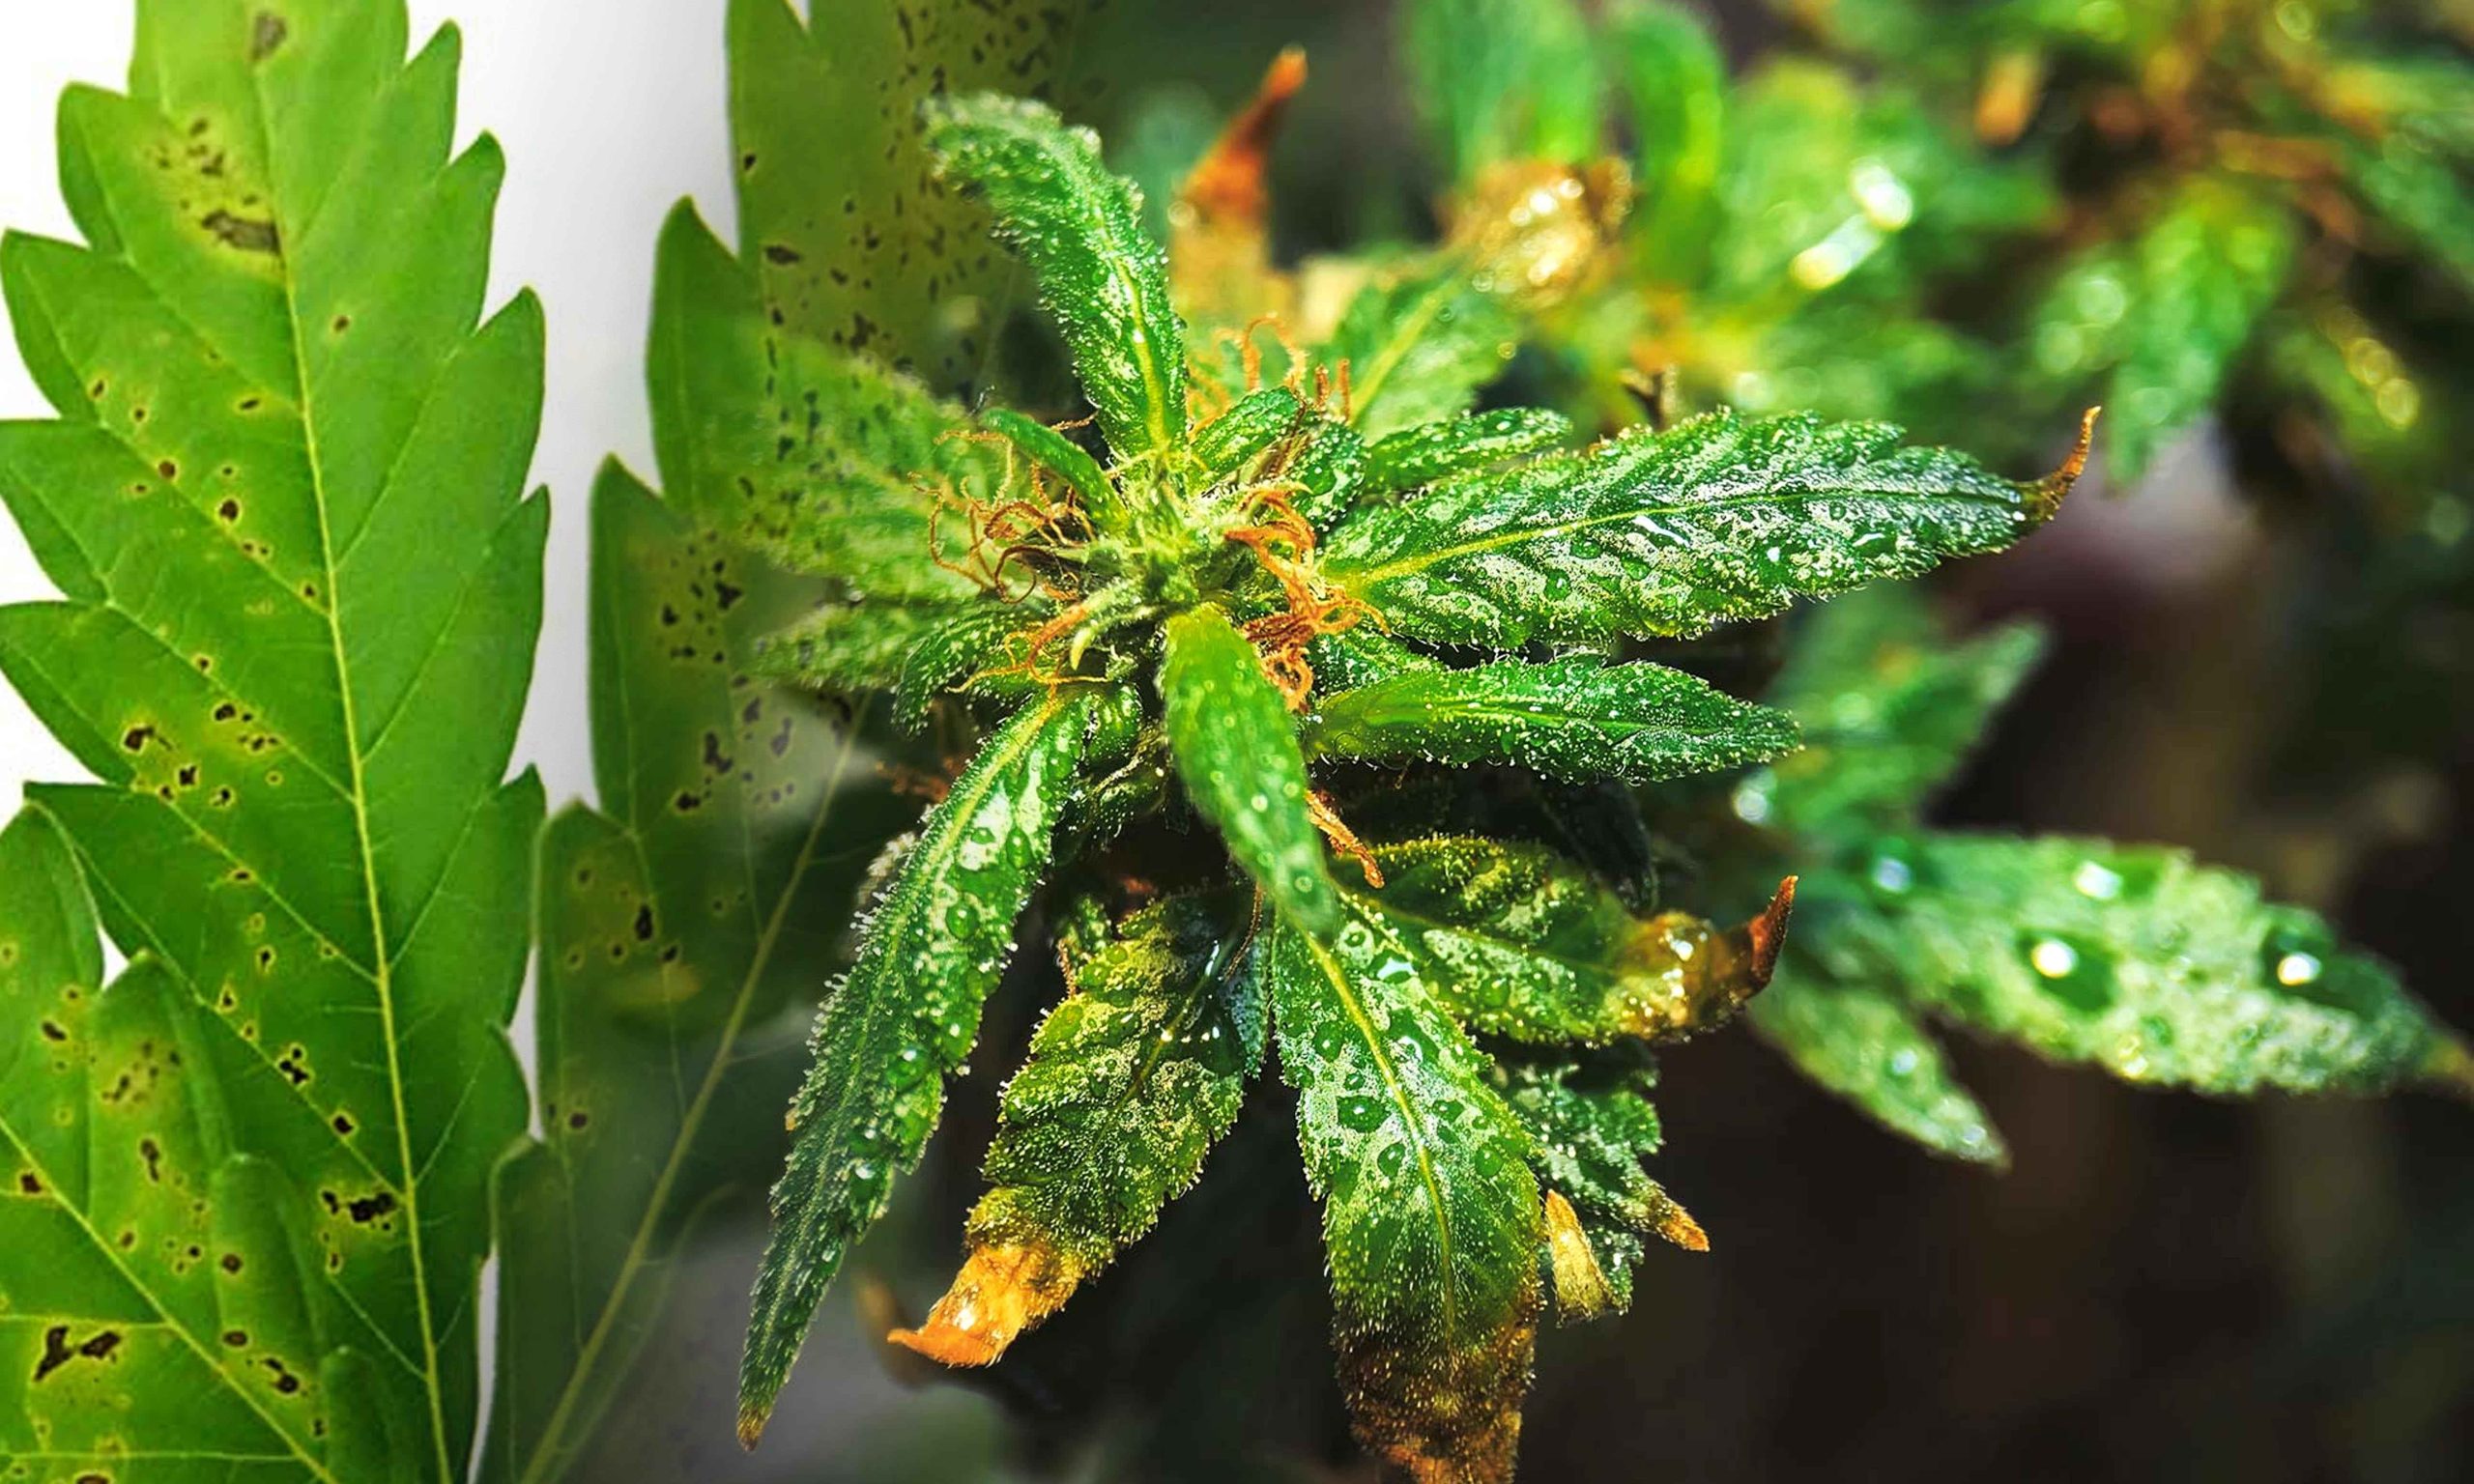 Freecompress Understanding And Treating Black Spots On Cannabis Leaves Pic Overwatering Scaled, Crop King Seeds